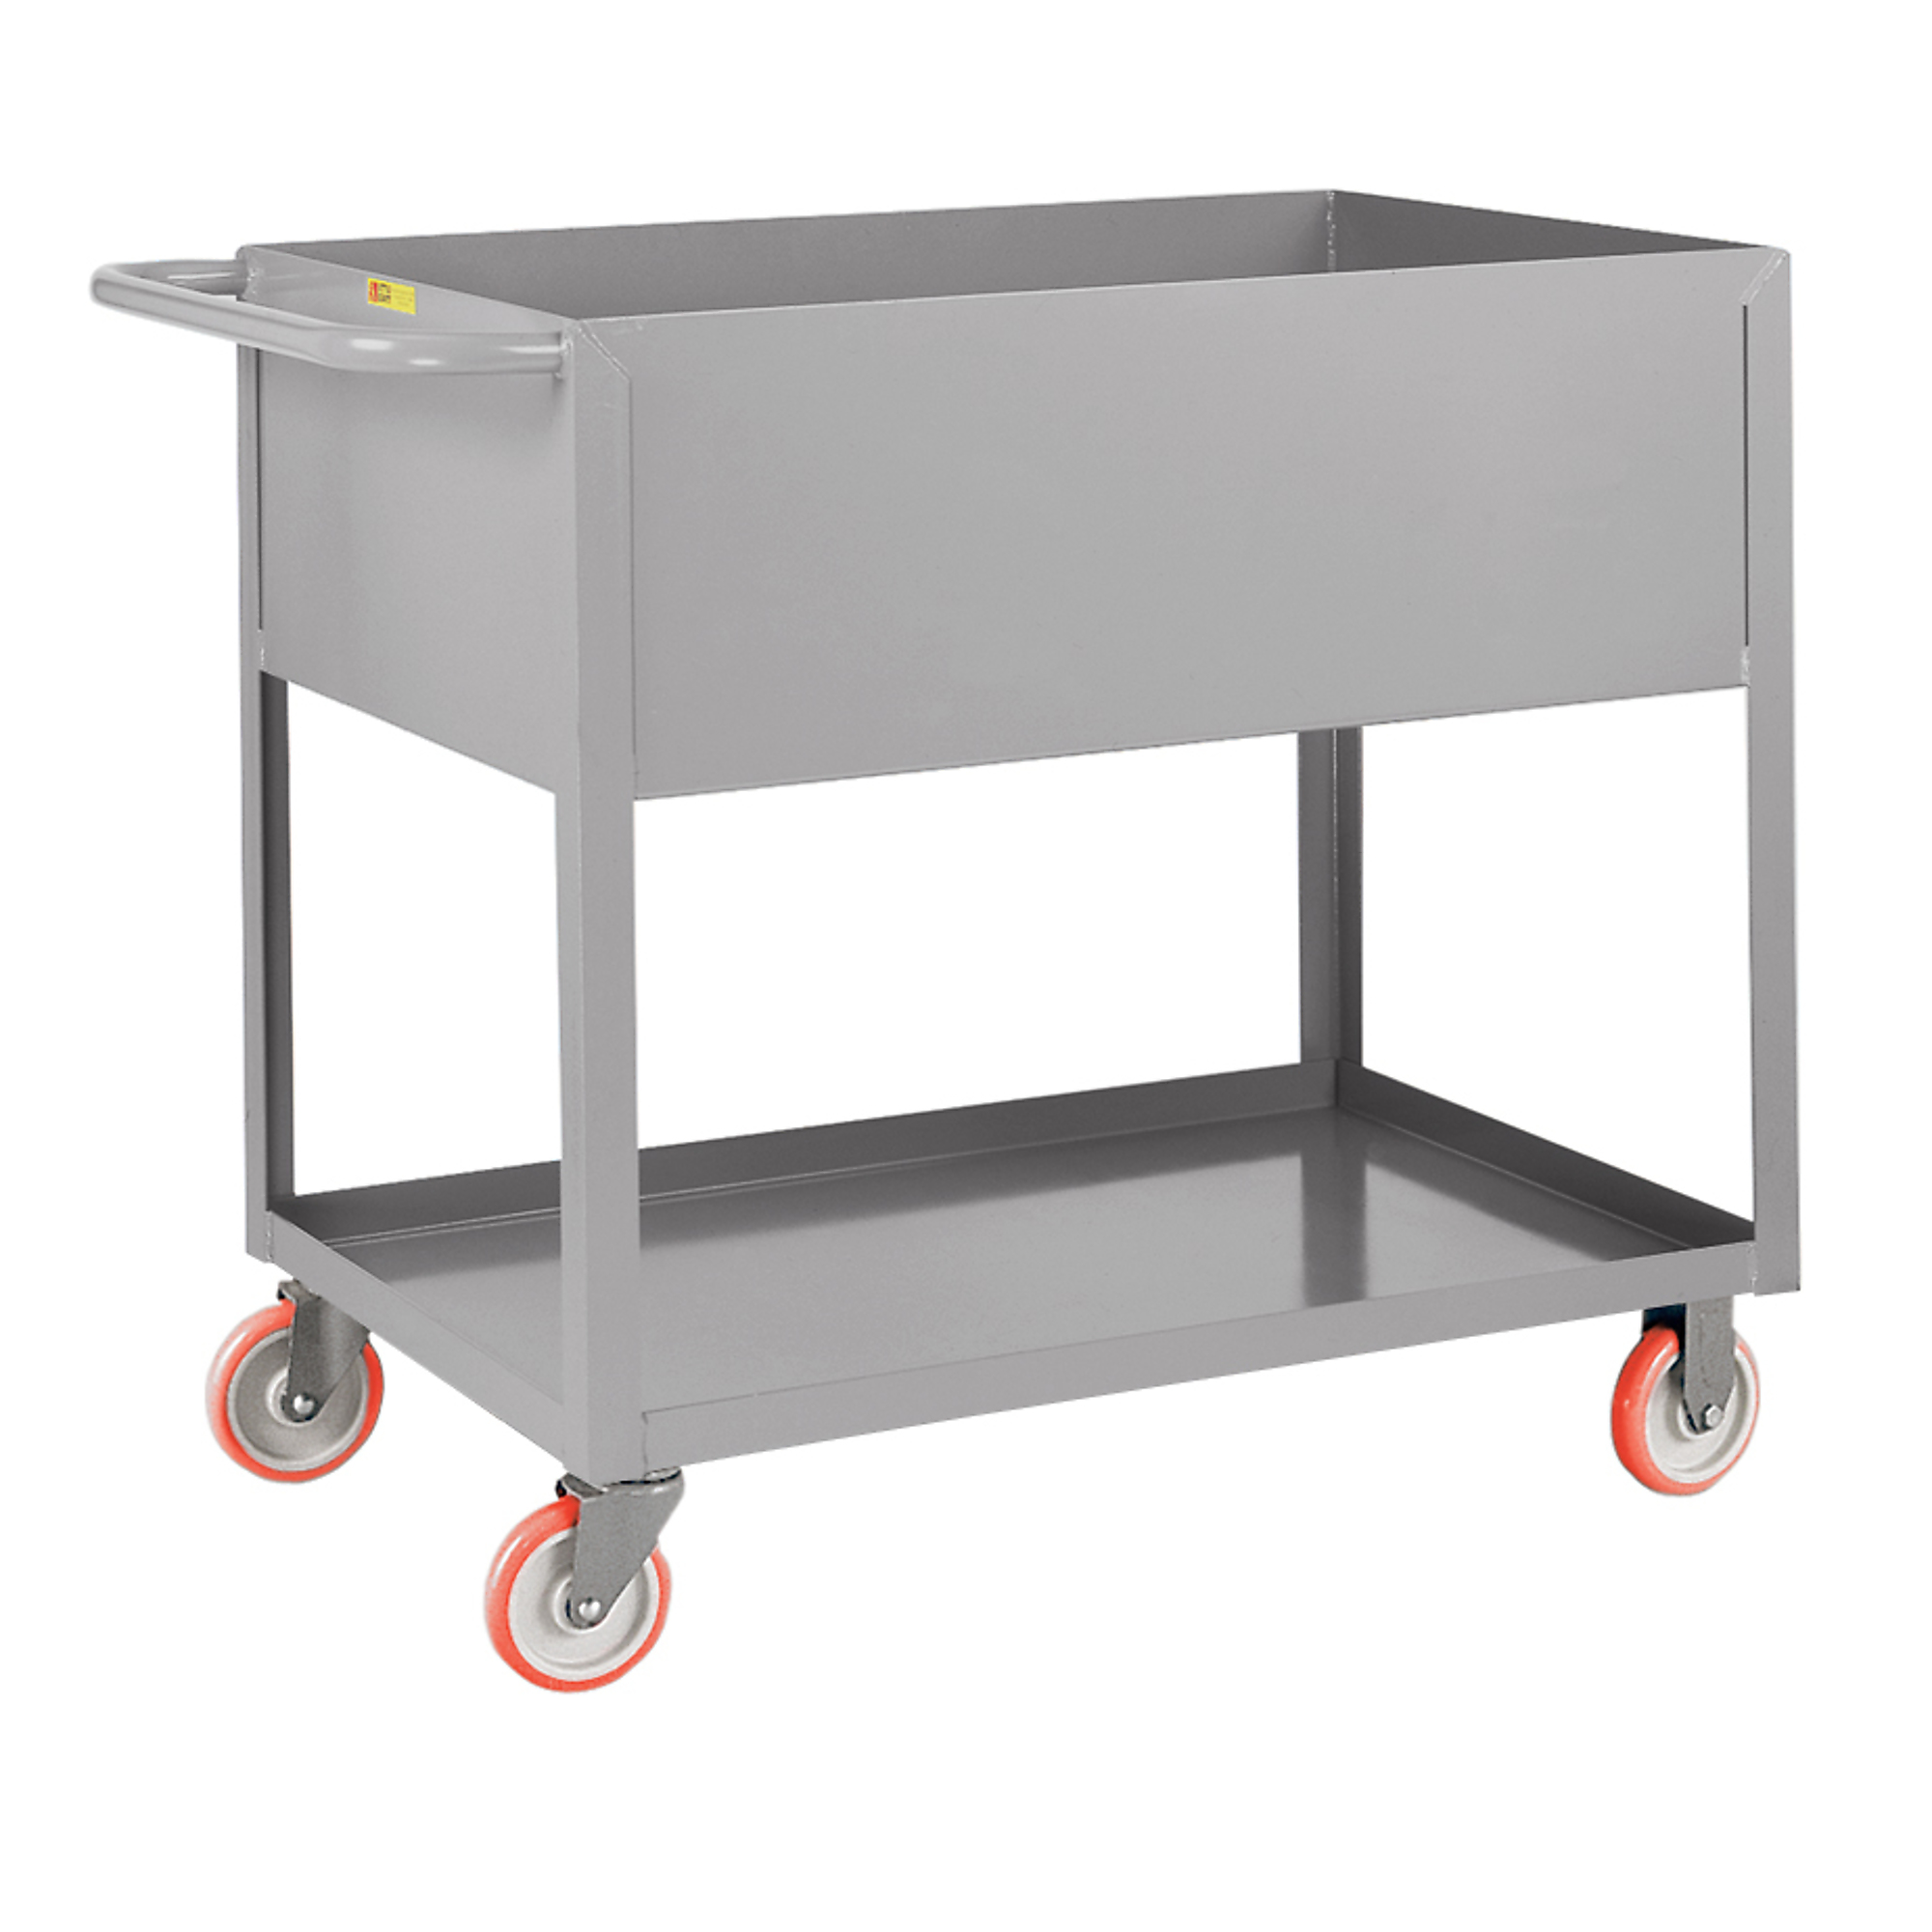 Little Giant, 12Inch Deep Shelf Truck, 18x30, 1200 lbs, Total Capacity 1200 lb, Shelves (qty.) 2, Material Carbon Steel, Model DS1830X12-5PY